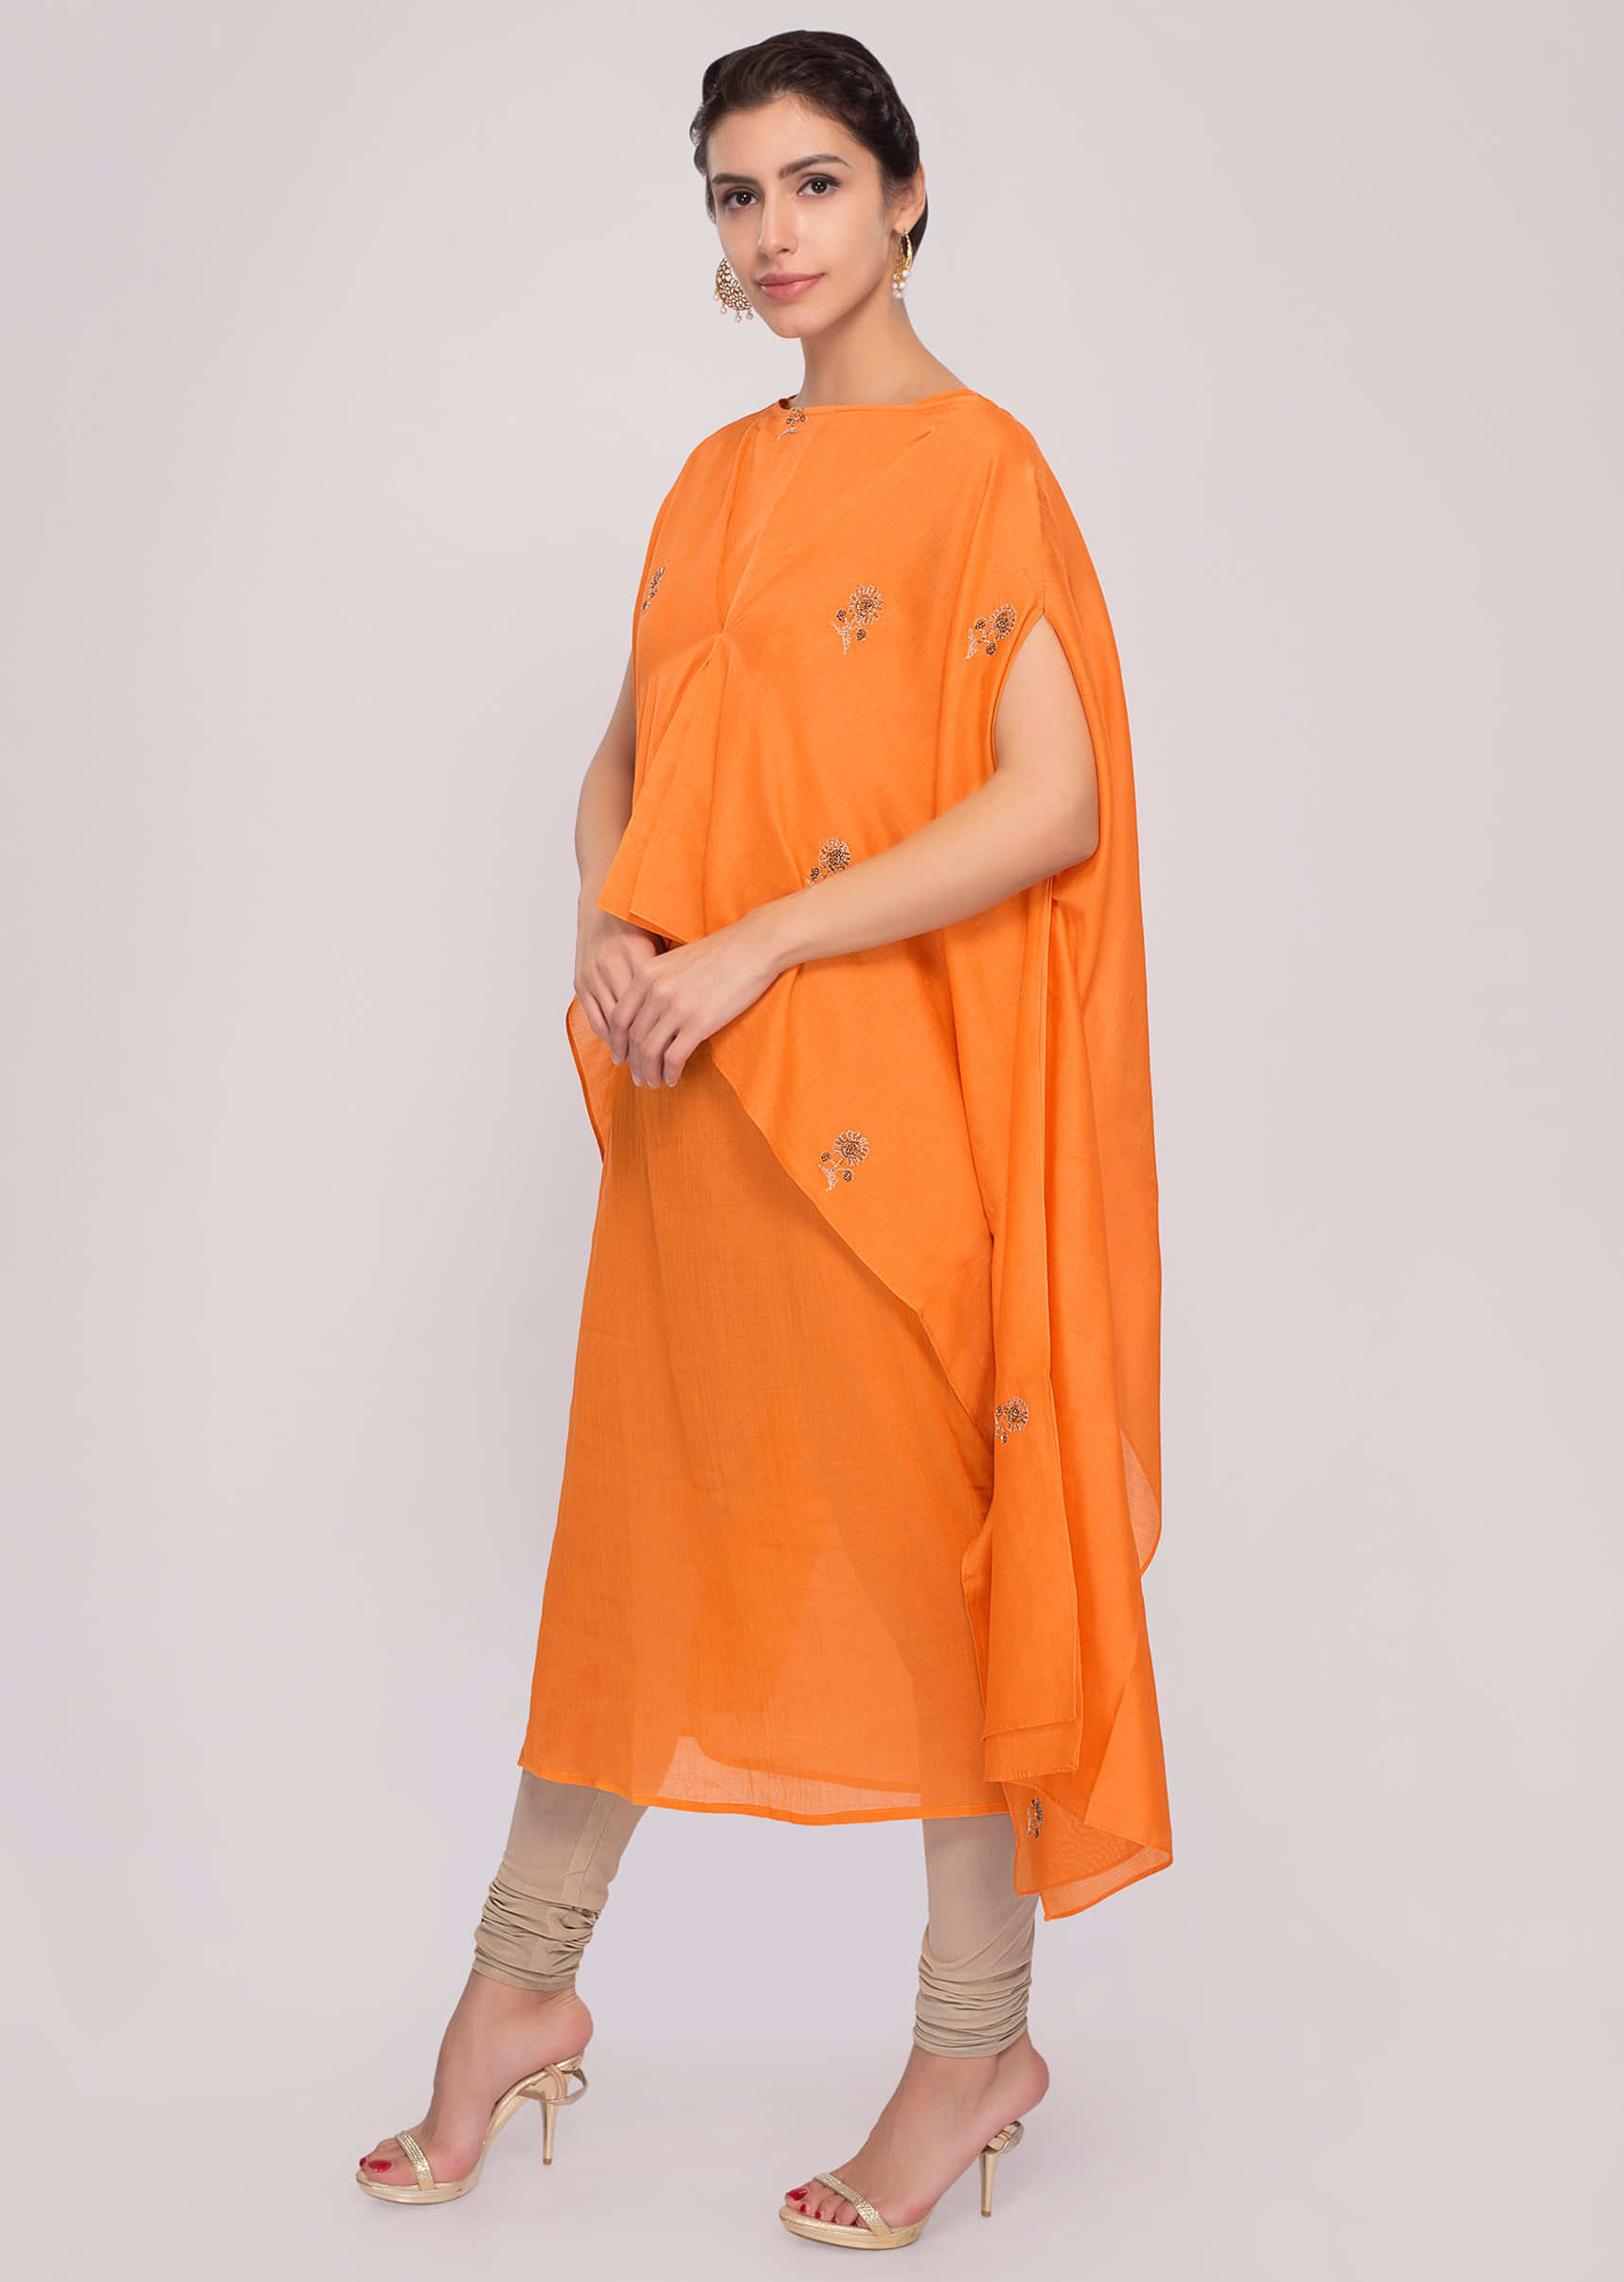 Tangerine orange cotton kurti with over lay fancy jacket in butti